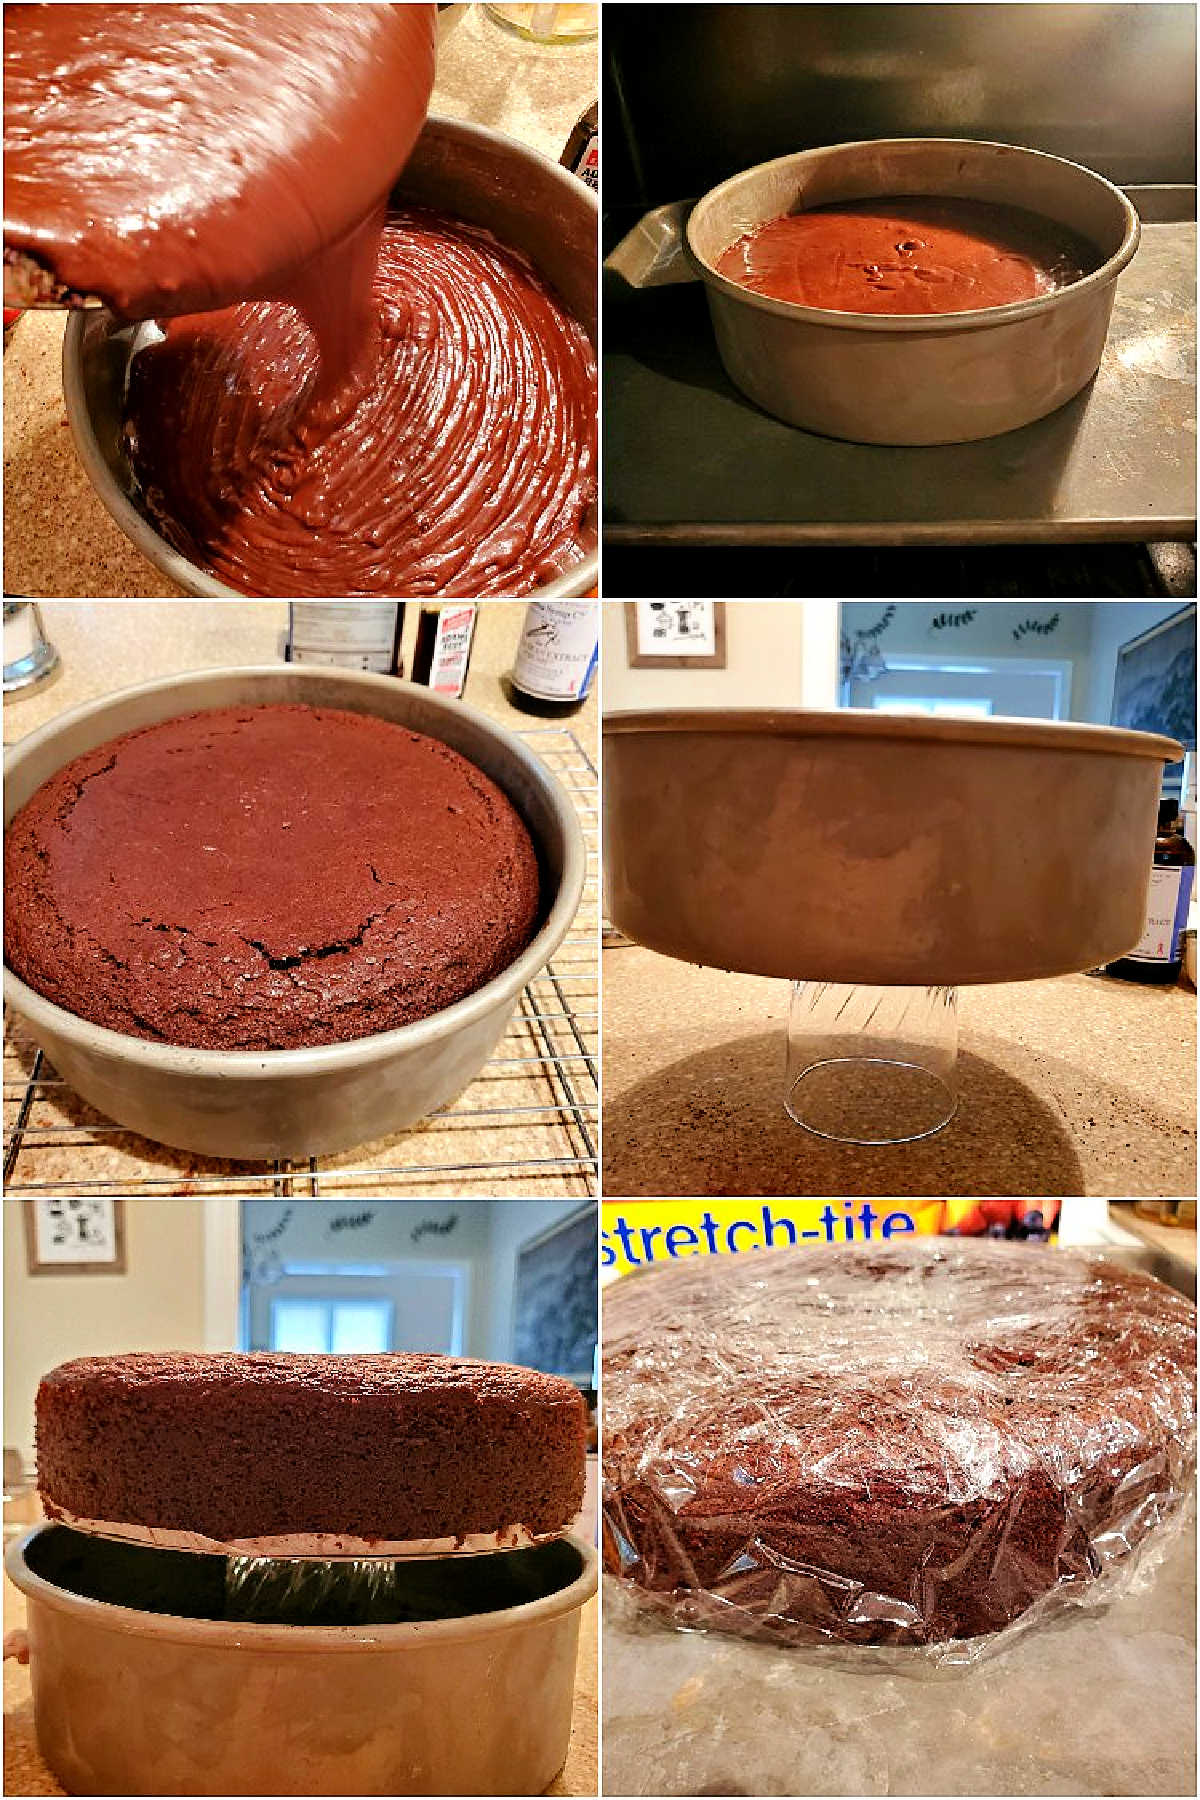 6 images showing pouring cake batter into the pan, baking it, removing it from the pan and wrapping it in plastic wrap to cool.